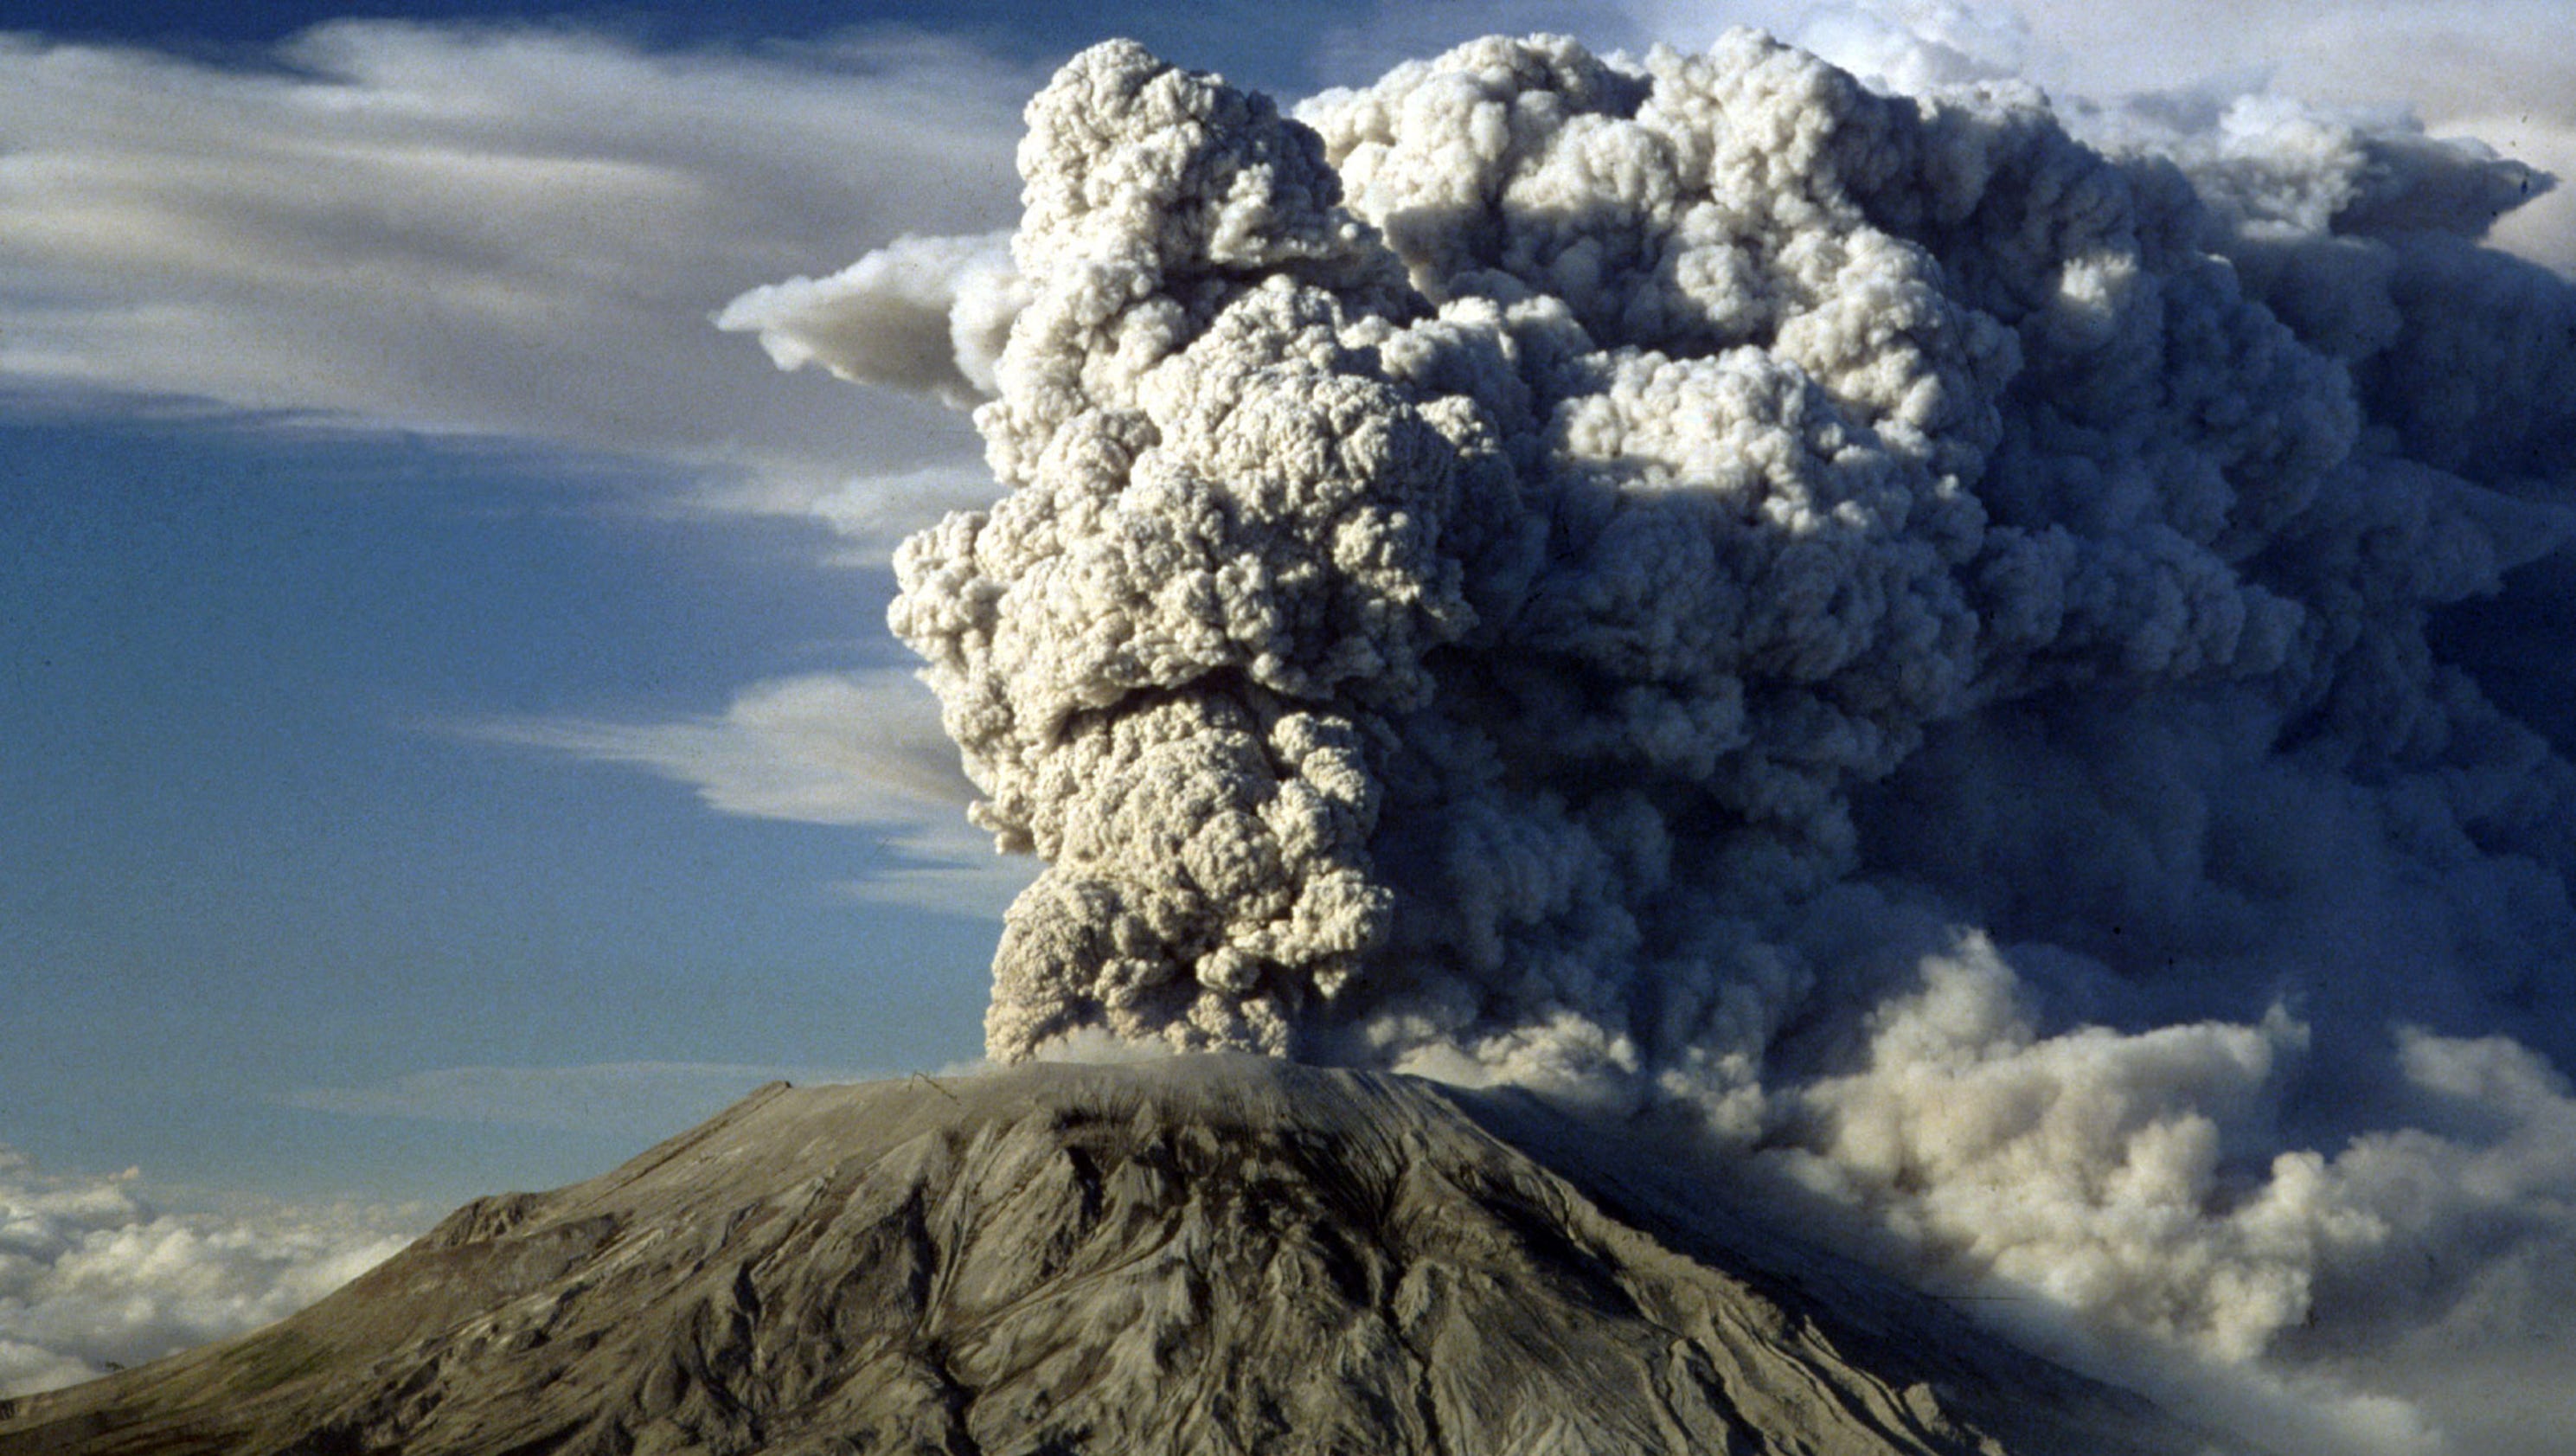 Mount St. Helens Facts about deadliest U.S. volcanic event 35 years later